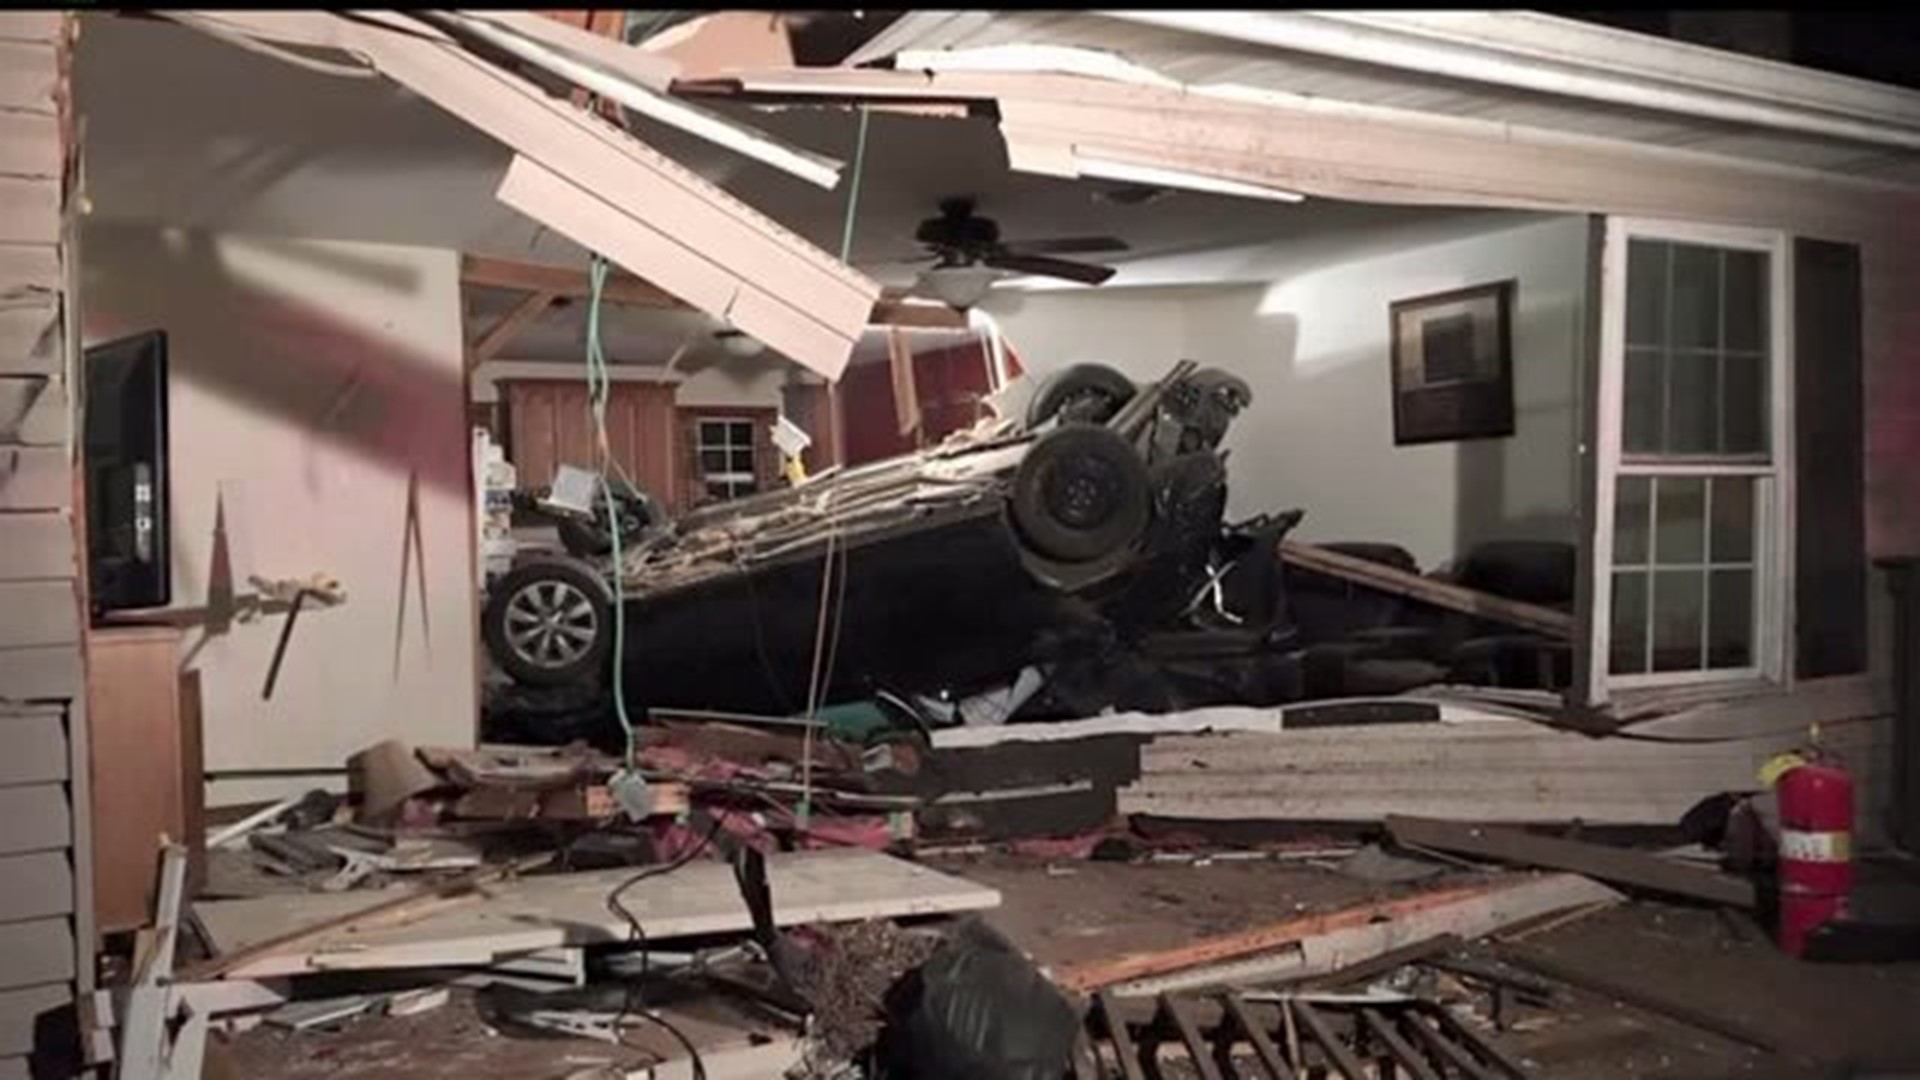 Car crashes into house, injures woman